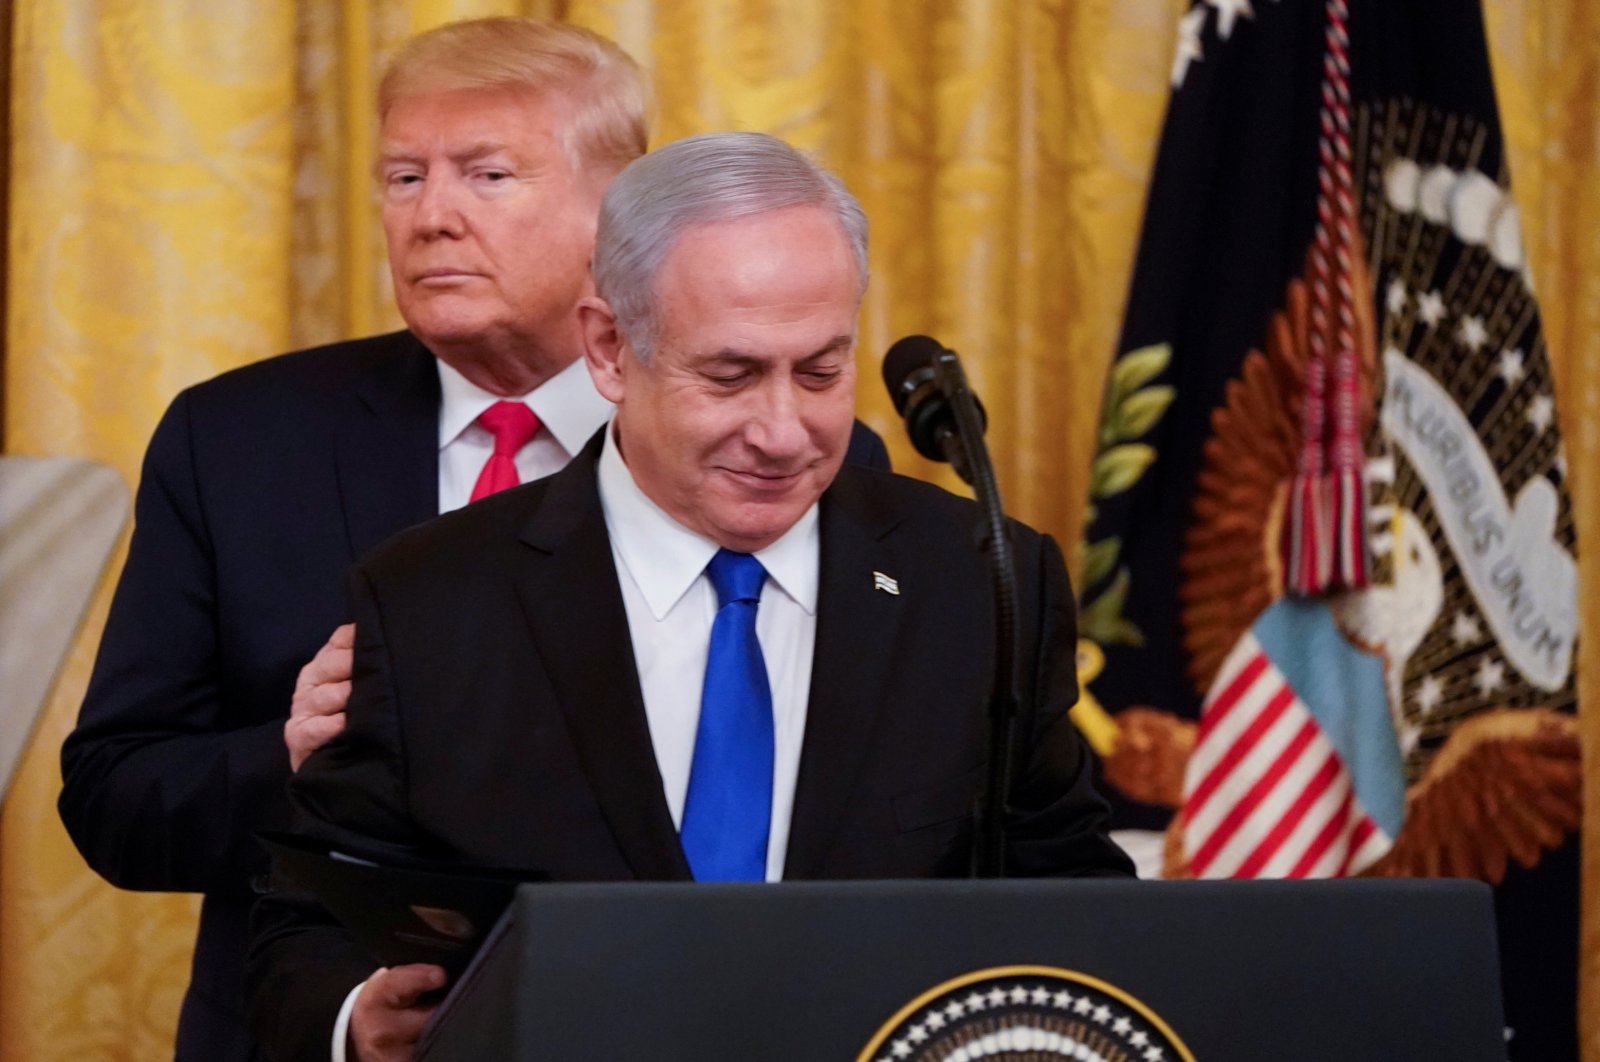 U.S. President Donald Trump puts his hands on Israel's Prime Minister Benjamin Netanyahu's shoulders as they deliver joint remarks on a Middle East peace plan proposal in the East Room of the White House, Washington, D.C., U.S., Jan. 28, 2020. (REUTERS Photo)